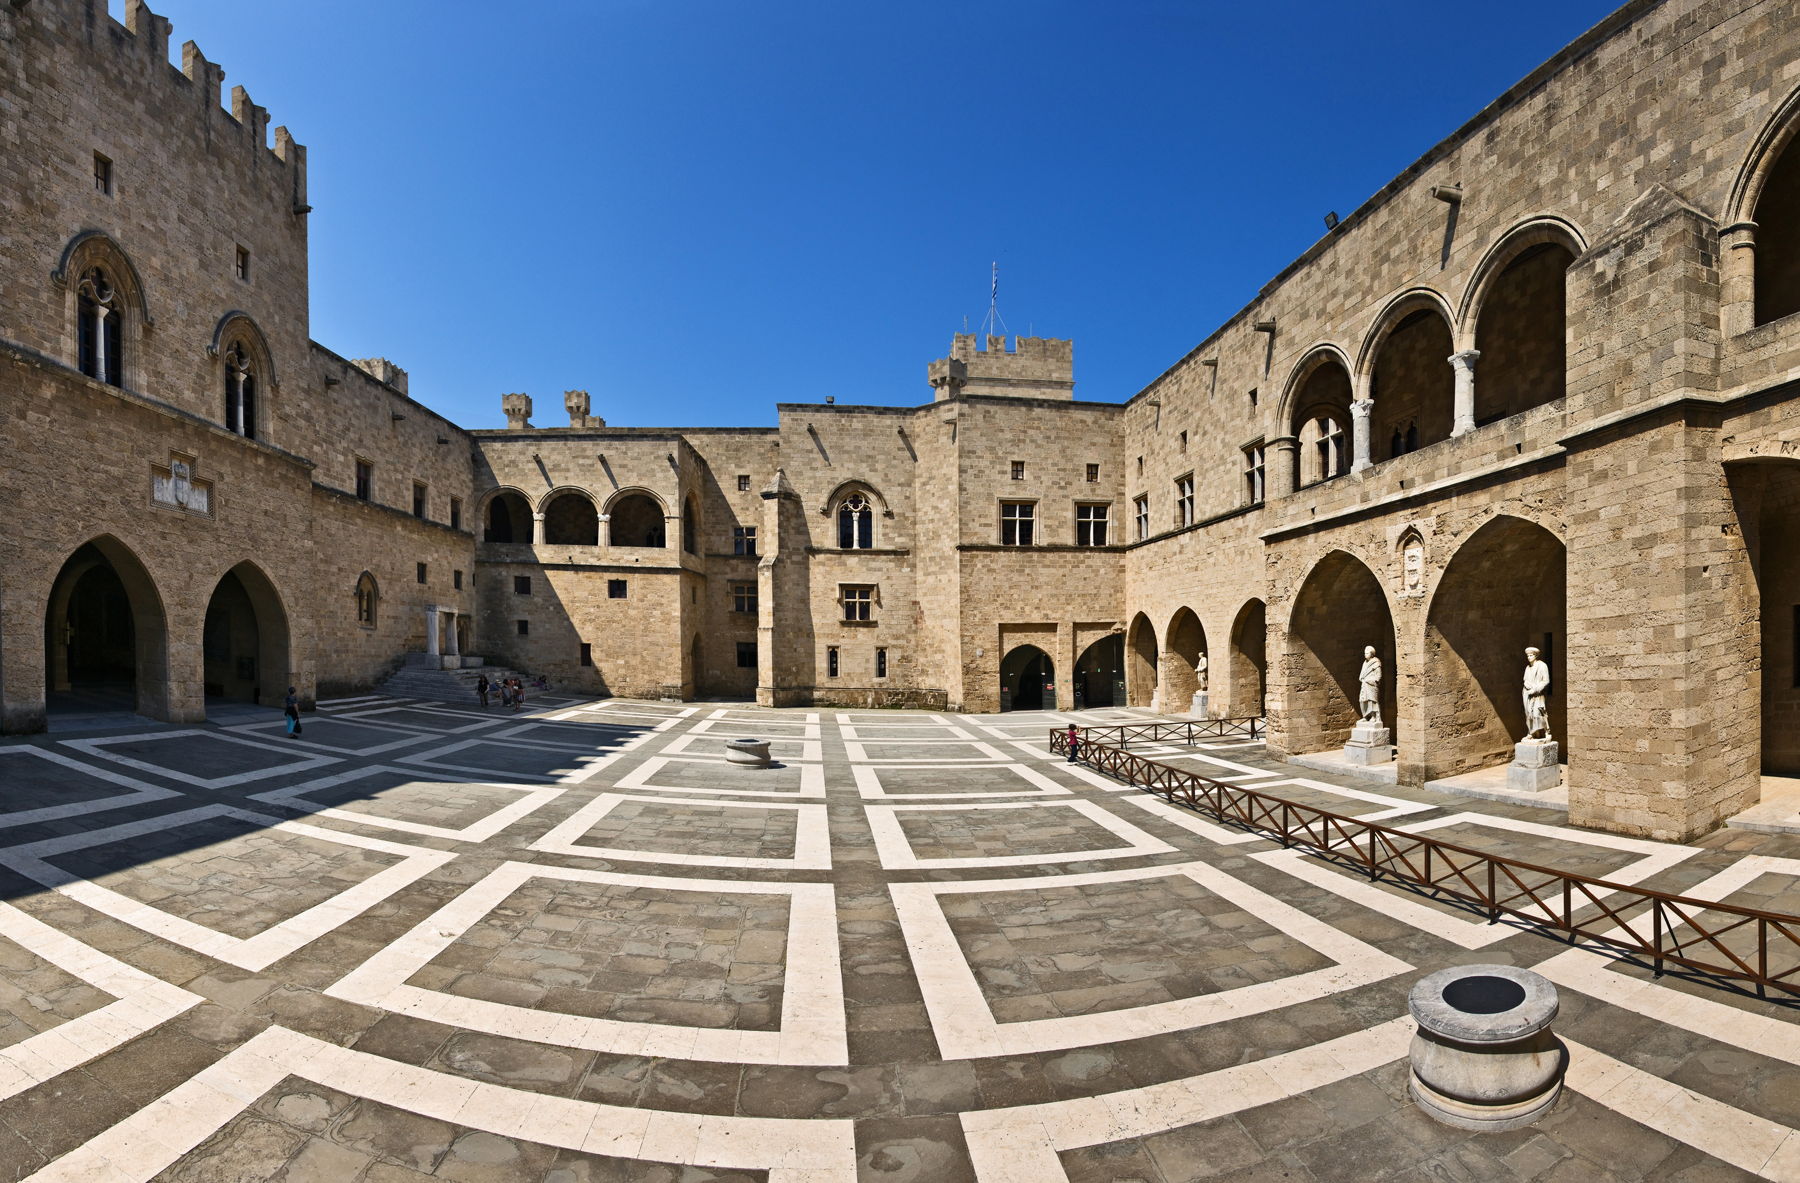 The palace of Rhodes